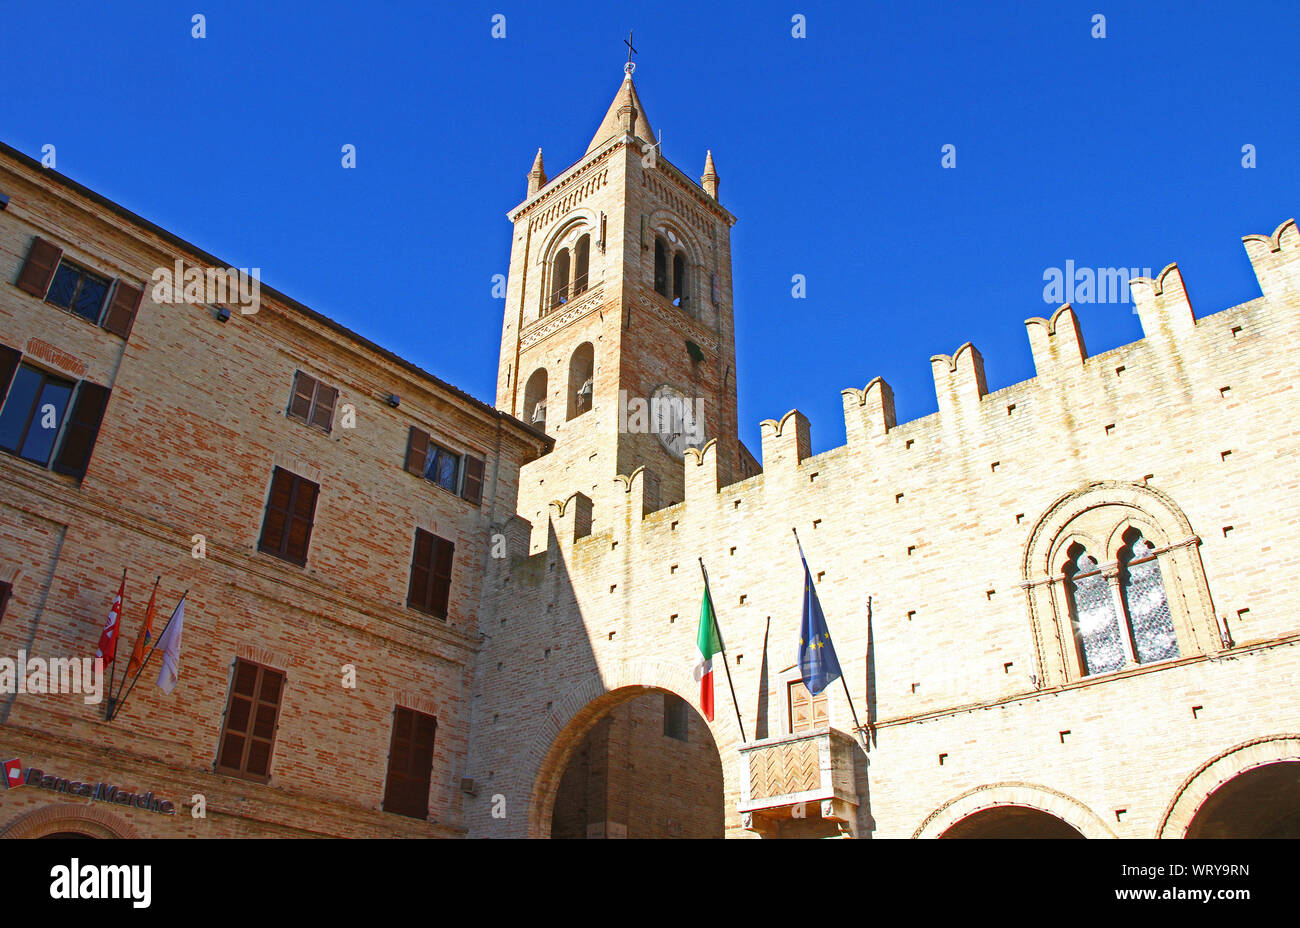 clock tower on the church in the Medieval village of Montecassiano  in the Marches or Le Marche region of central Italy near the town of Macerata Stock Photo